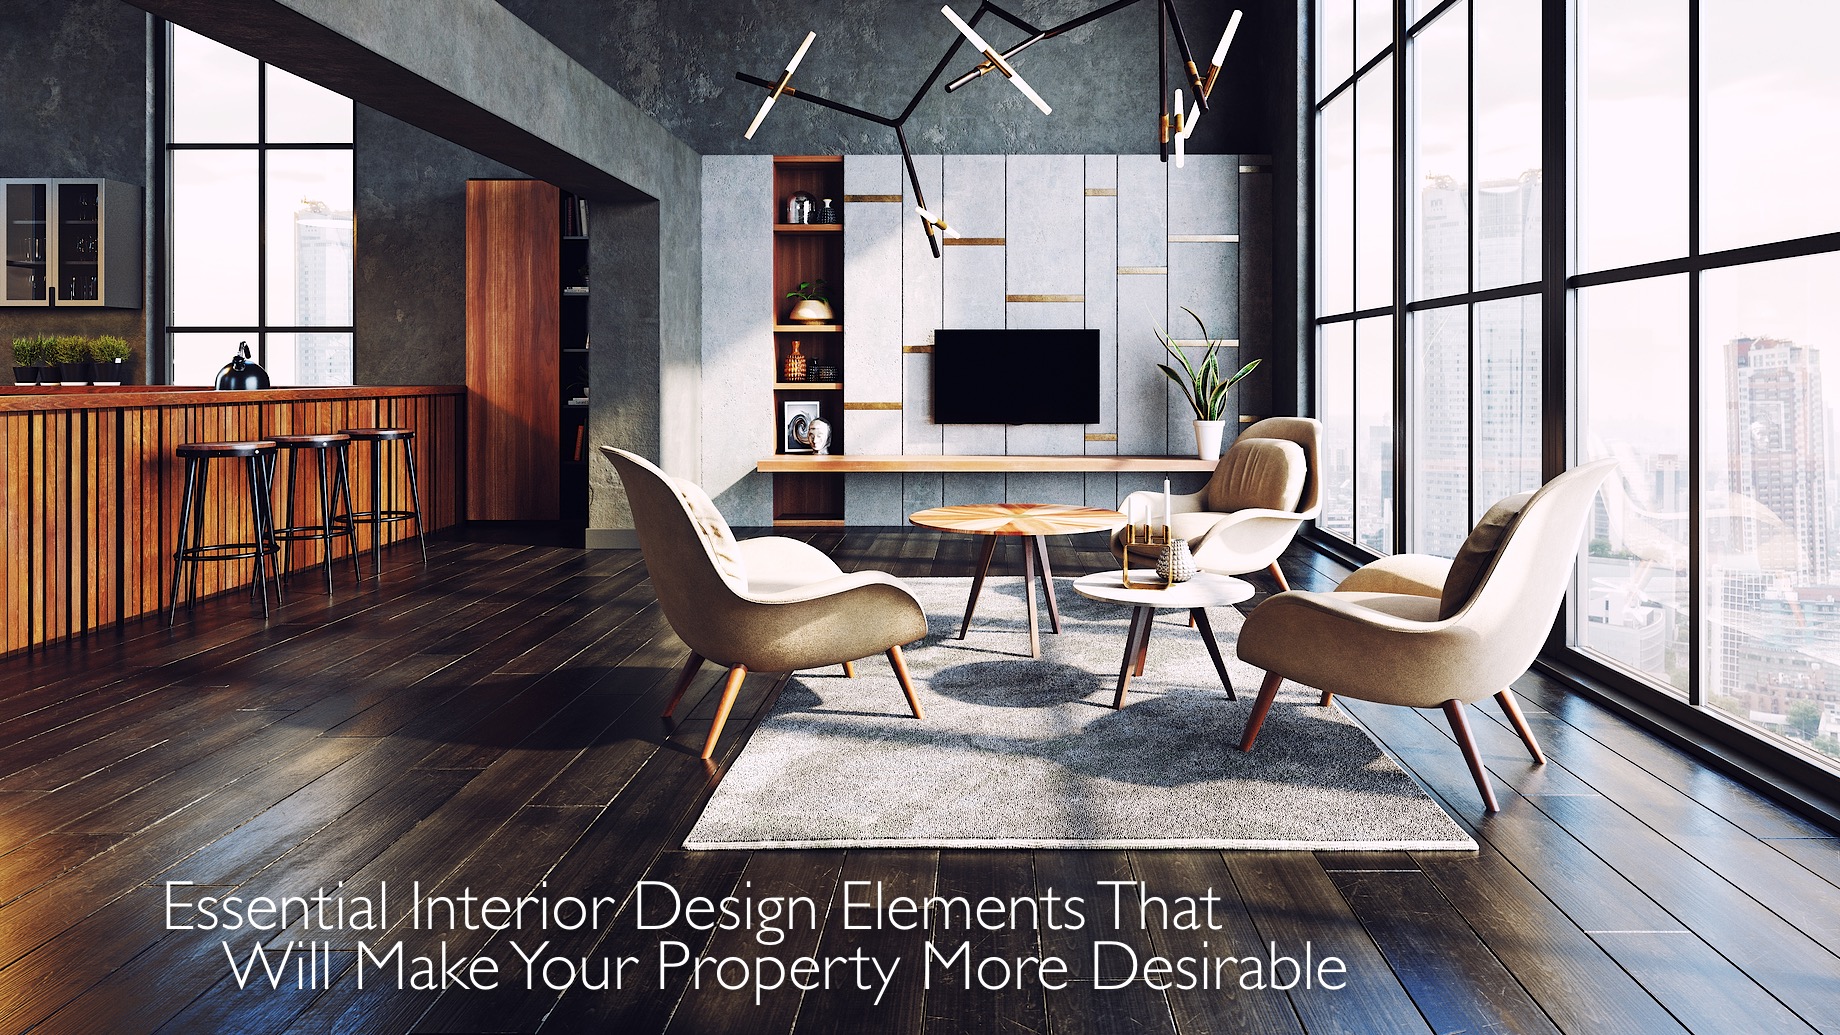 Essential Interior Design Elements That Will Make Your Property More Desirable